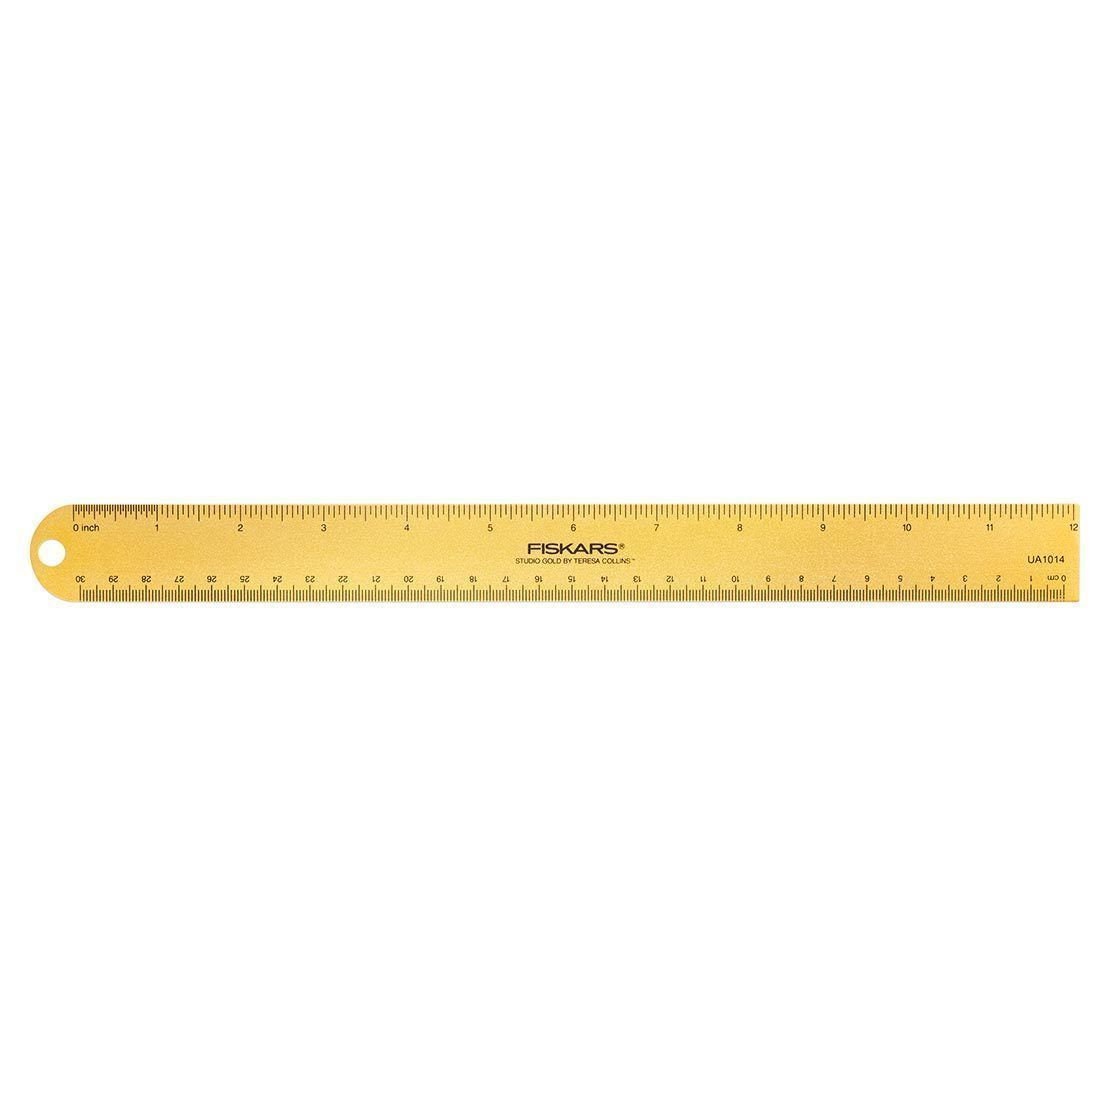 Sewing Ruler Garment Ruler Lightweight Portable Fashion Design Clear Ruler  for Sewing Quilting Crafts Making DIY Tools Measuring